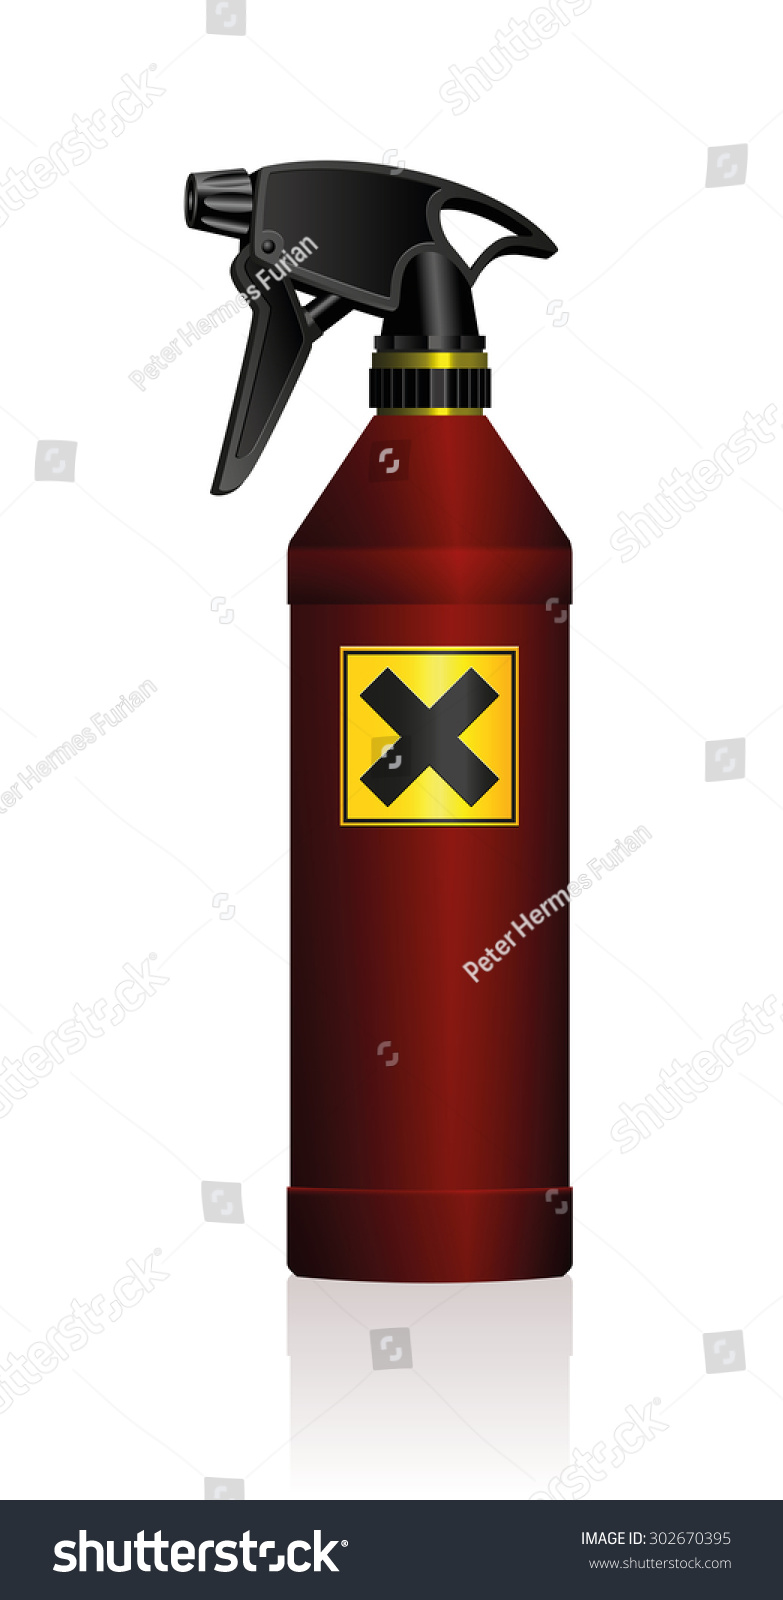 SVG of Poison spray bottle for plant toxins, insecticides, pesticides, biocides - with a black x on a yellow square as a hazard warning sign for harmfulness or irritants. Isolated vector on white background. svg